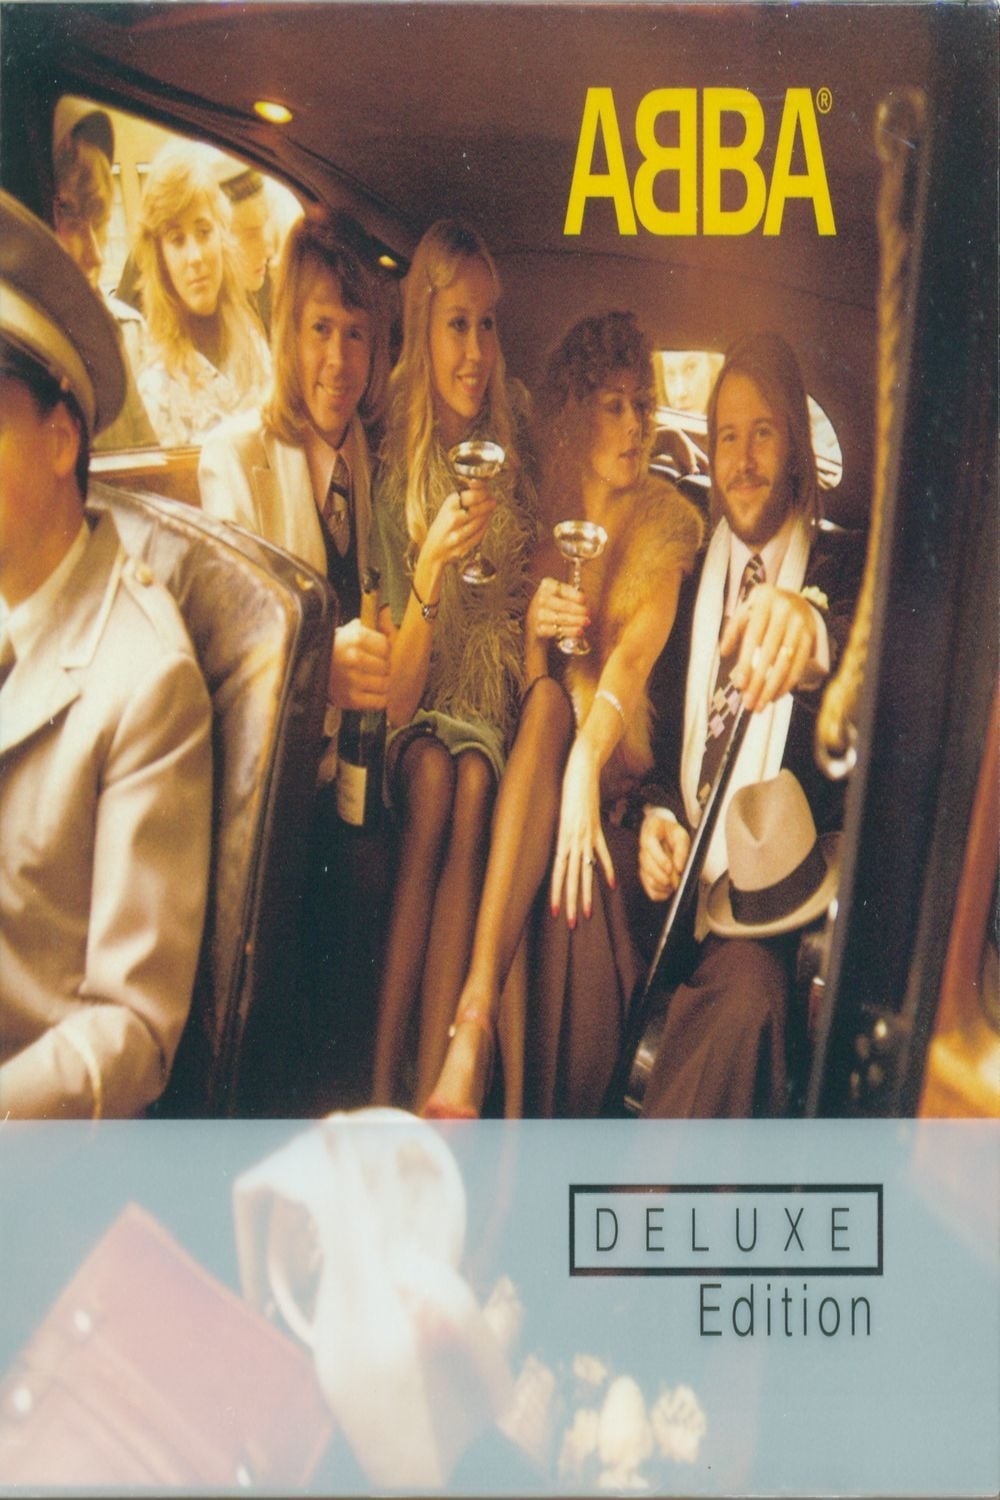 ABBA - ABBA (DVD from Deluxe Edition)